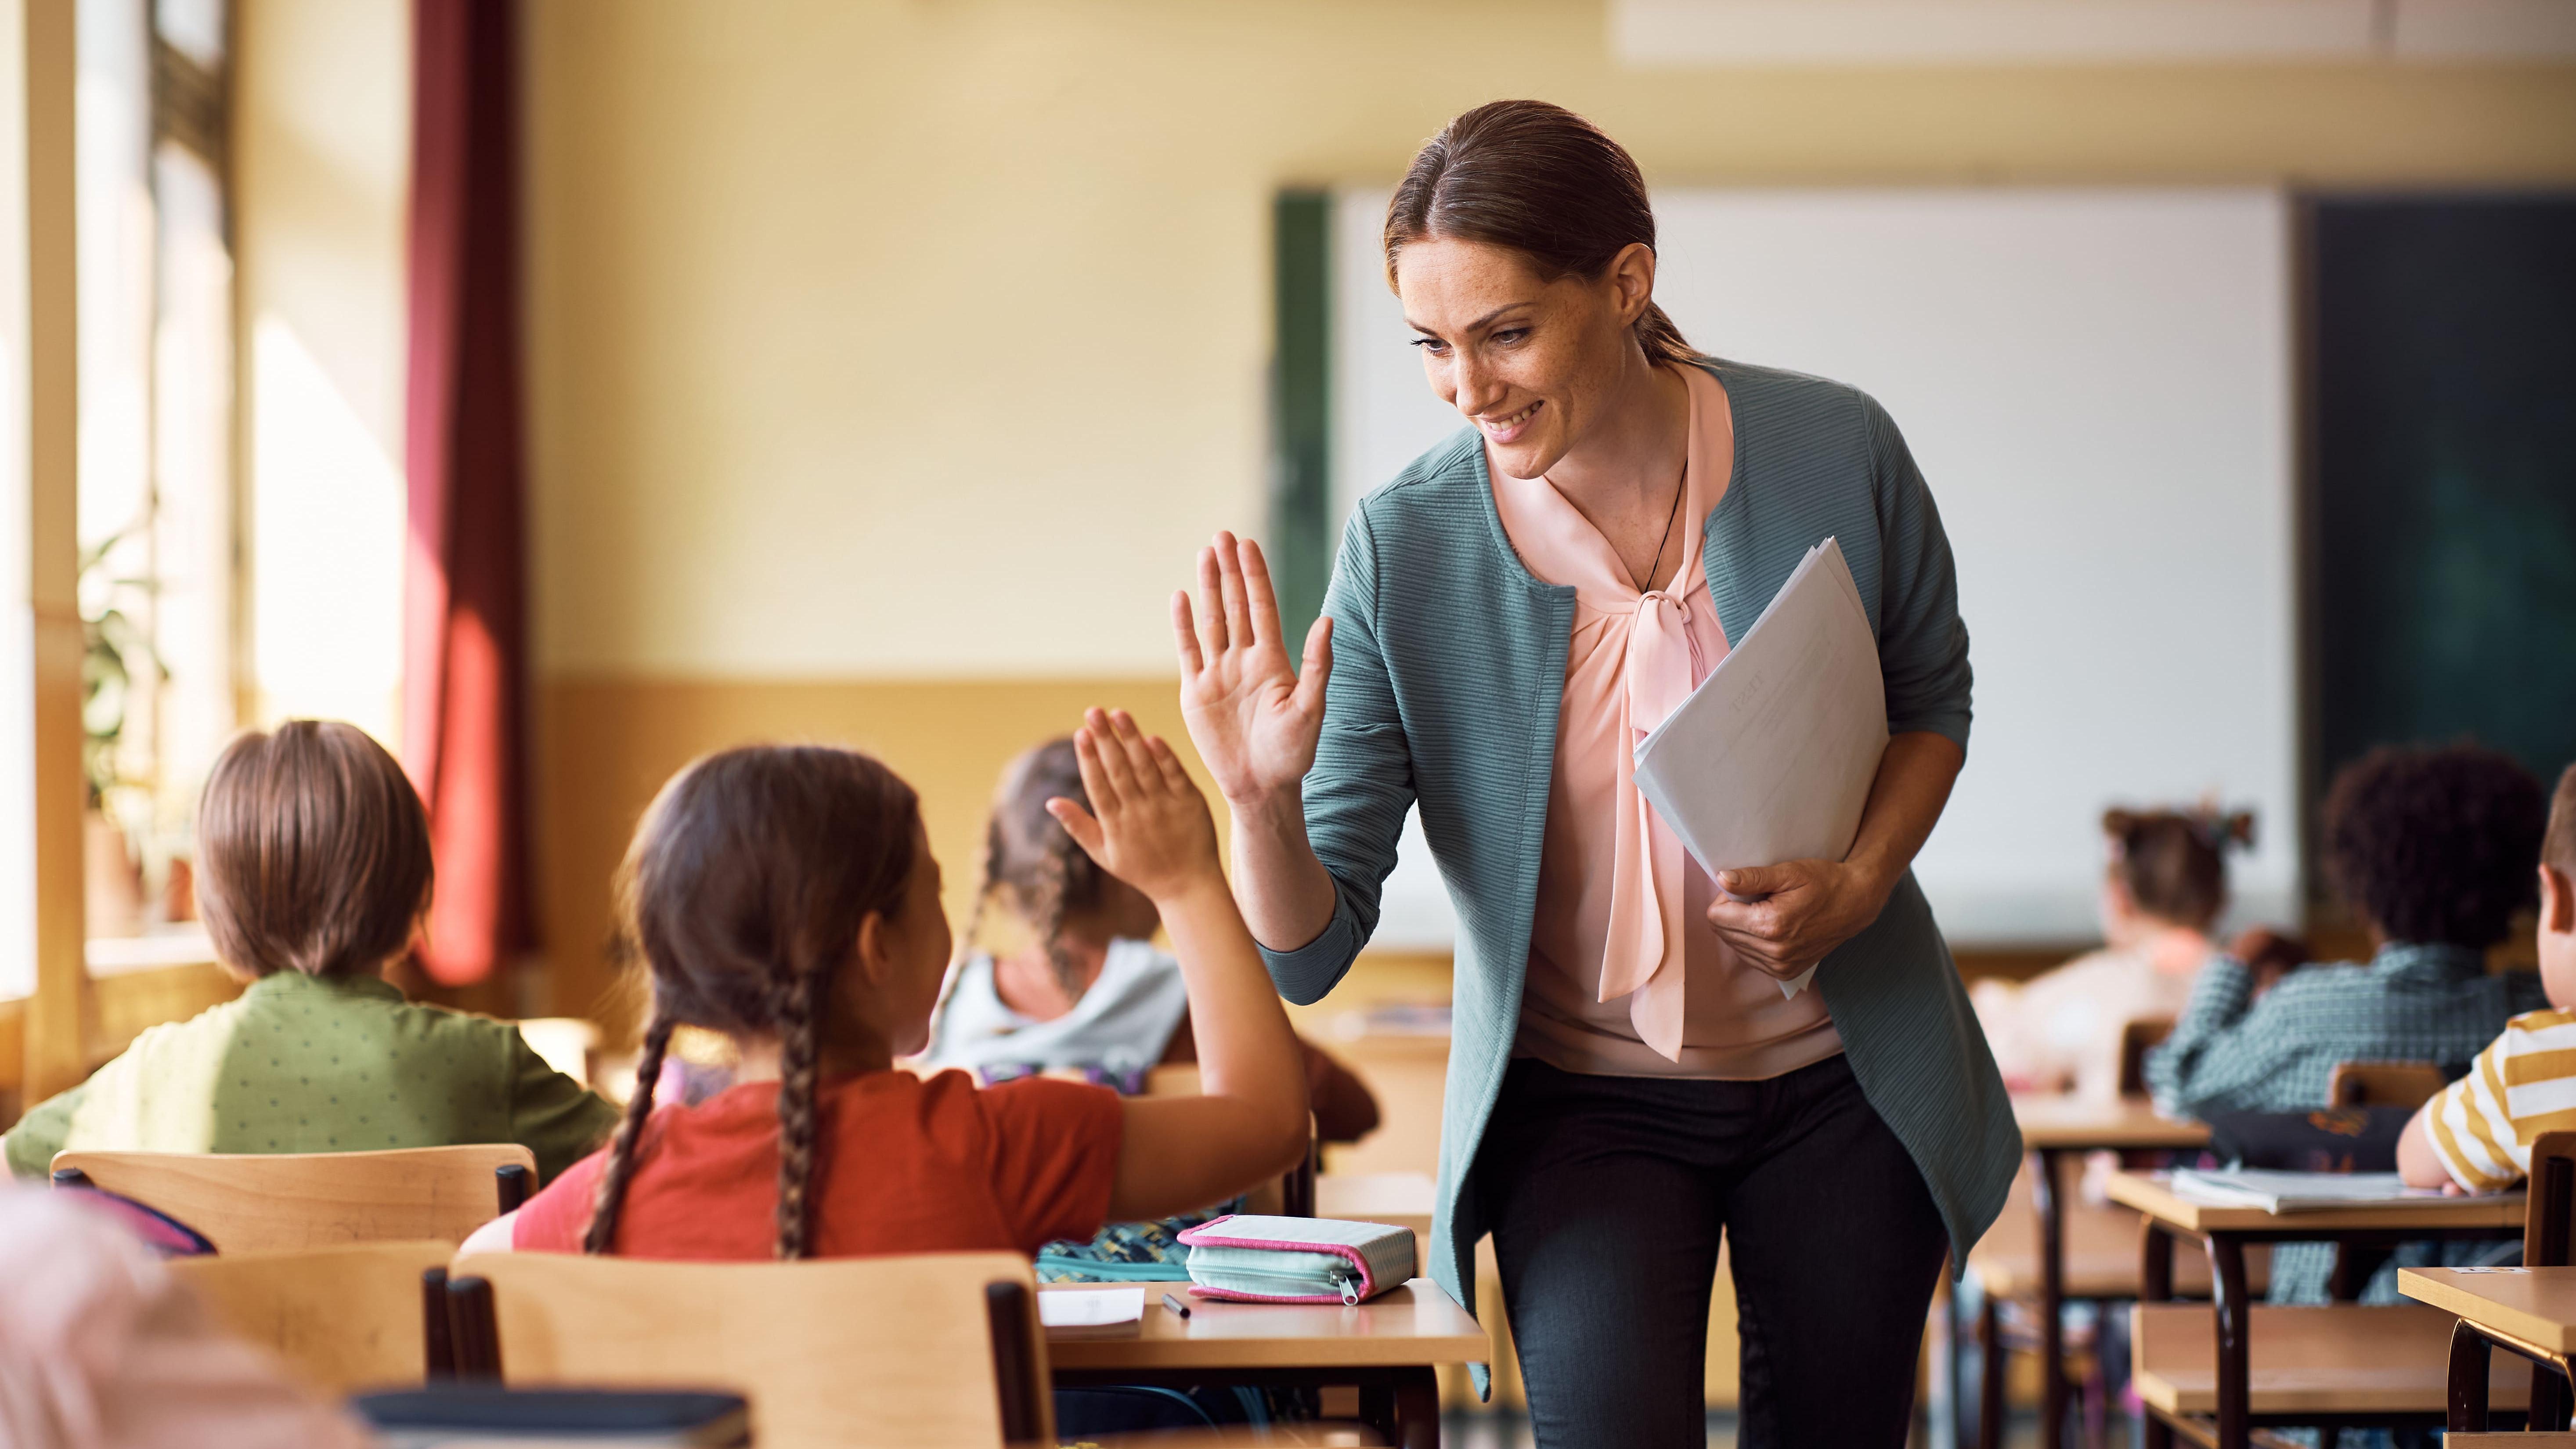 A teacher in a classroom gives a student a high five